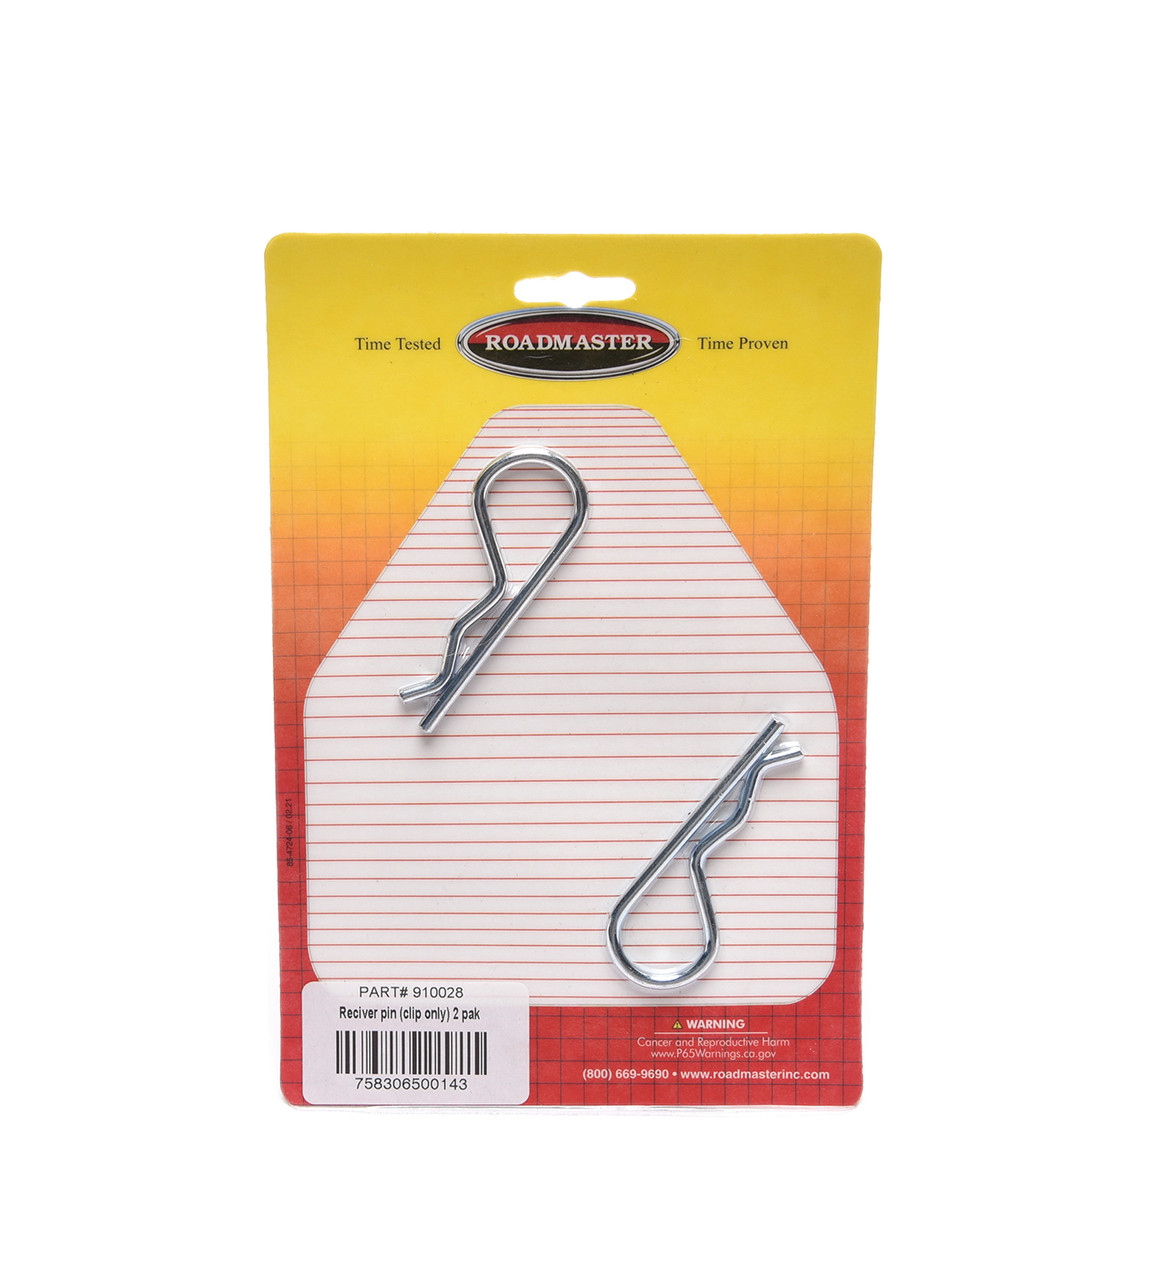 HAIRPIN CLIP ONLY FOR HITCH PIN - 2 PACK